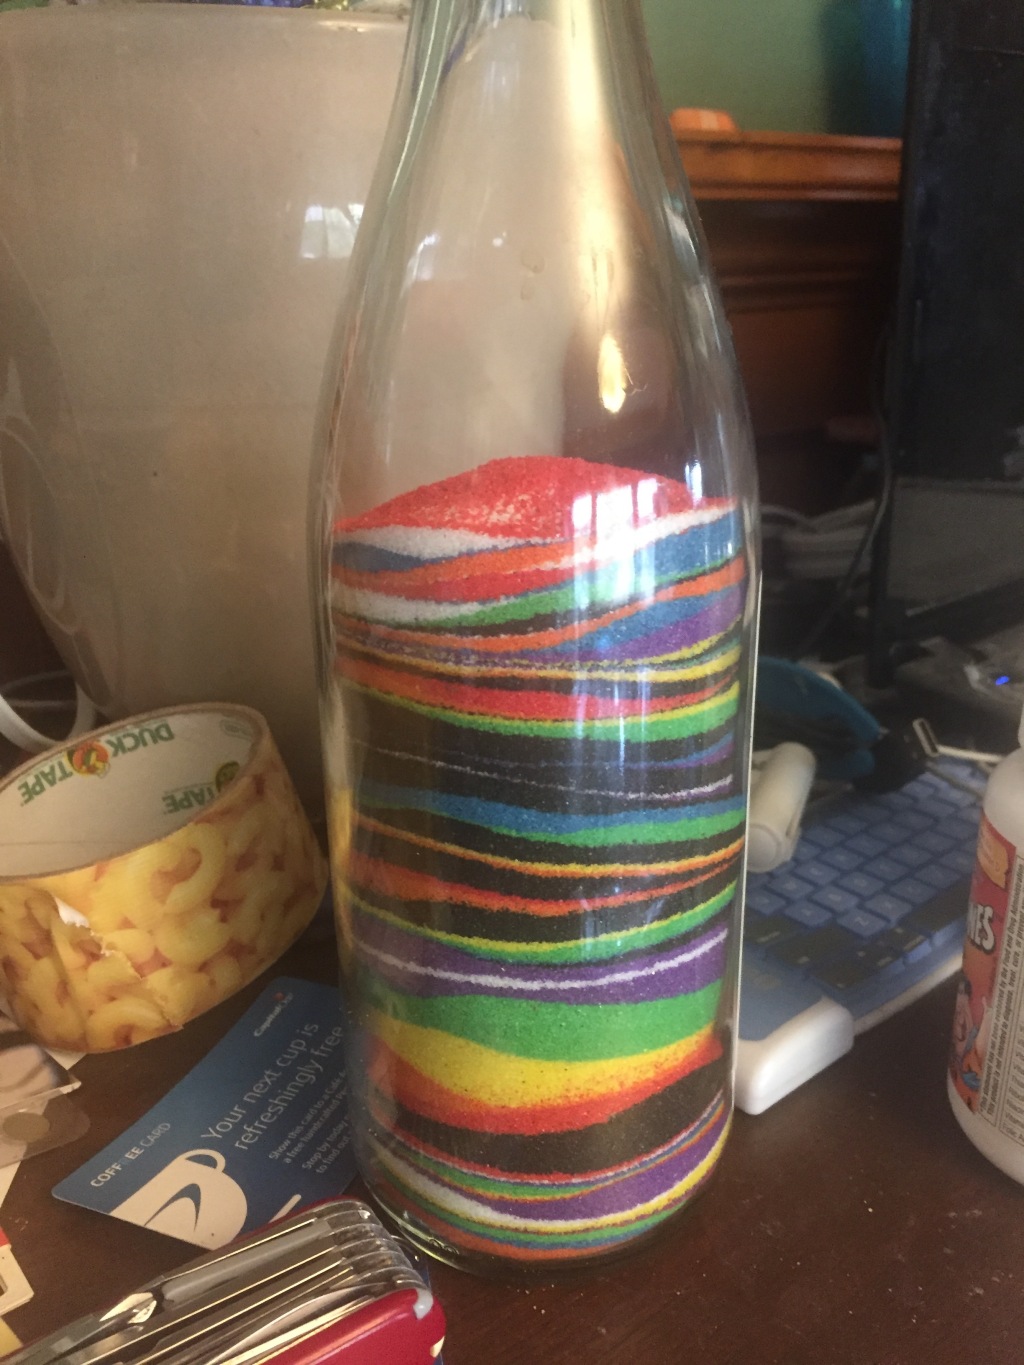 Colored sand art made by kids in clear wine bottle